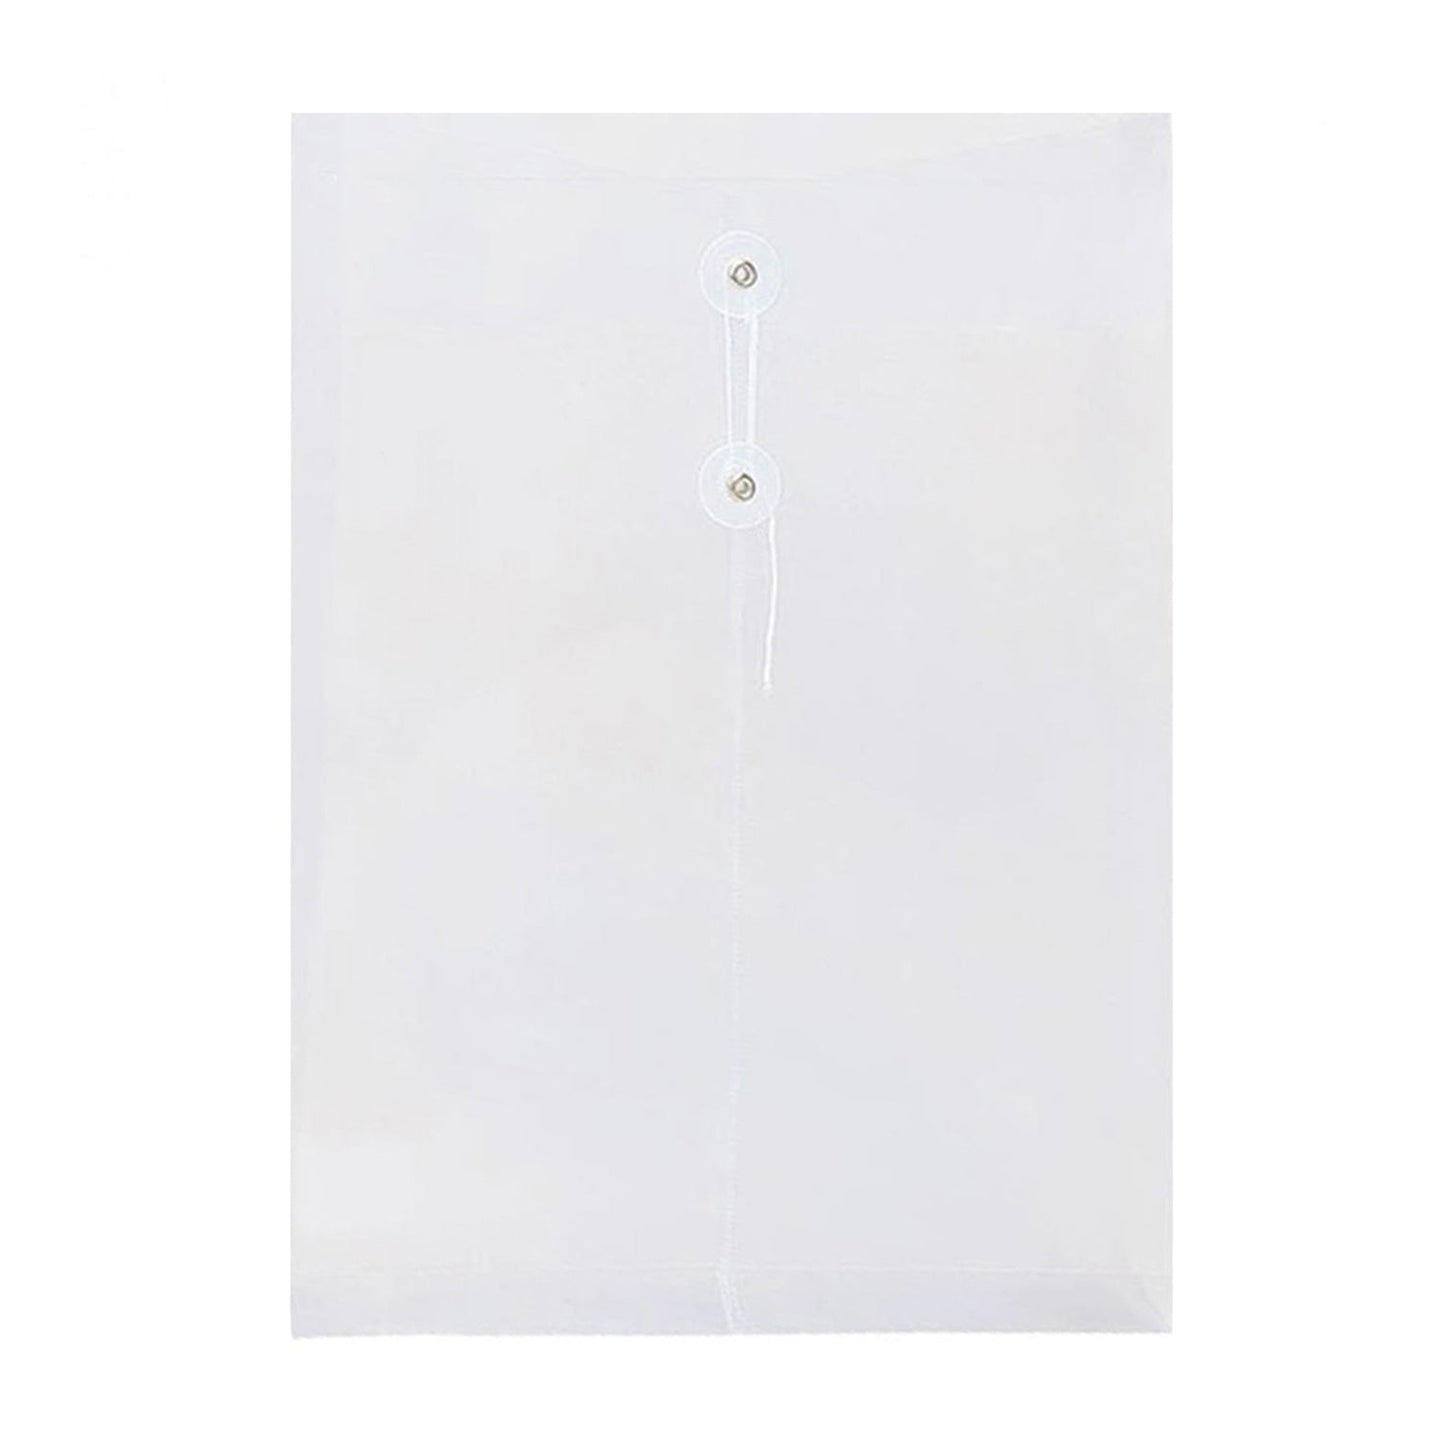 Plastic Envelopes with String Closure, Legal Size Expanding File Folders Documents